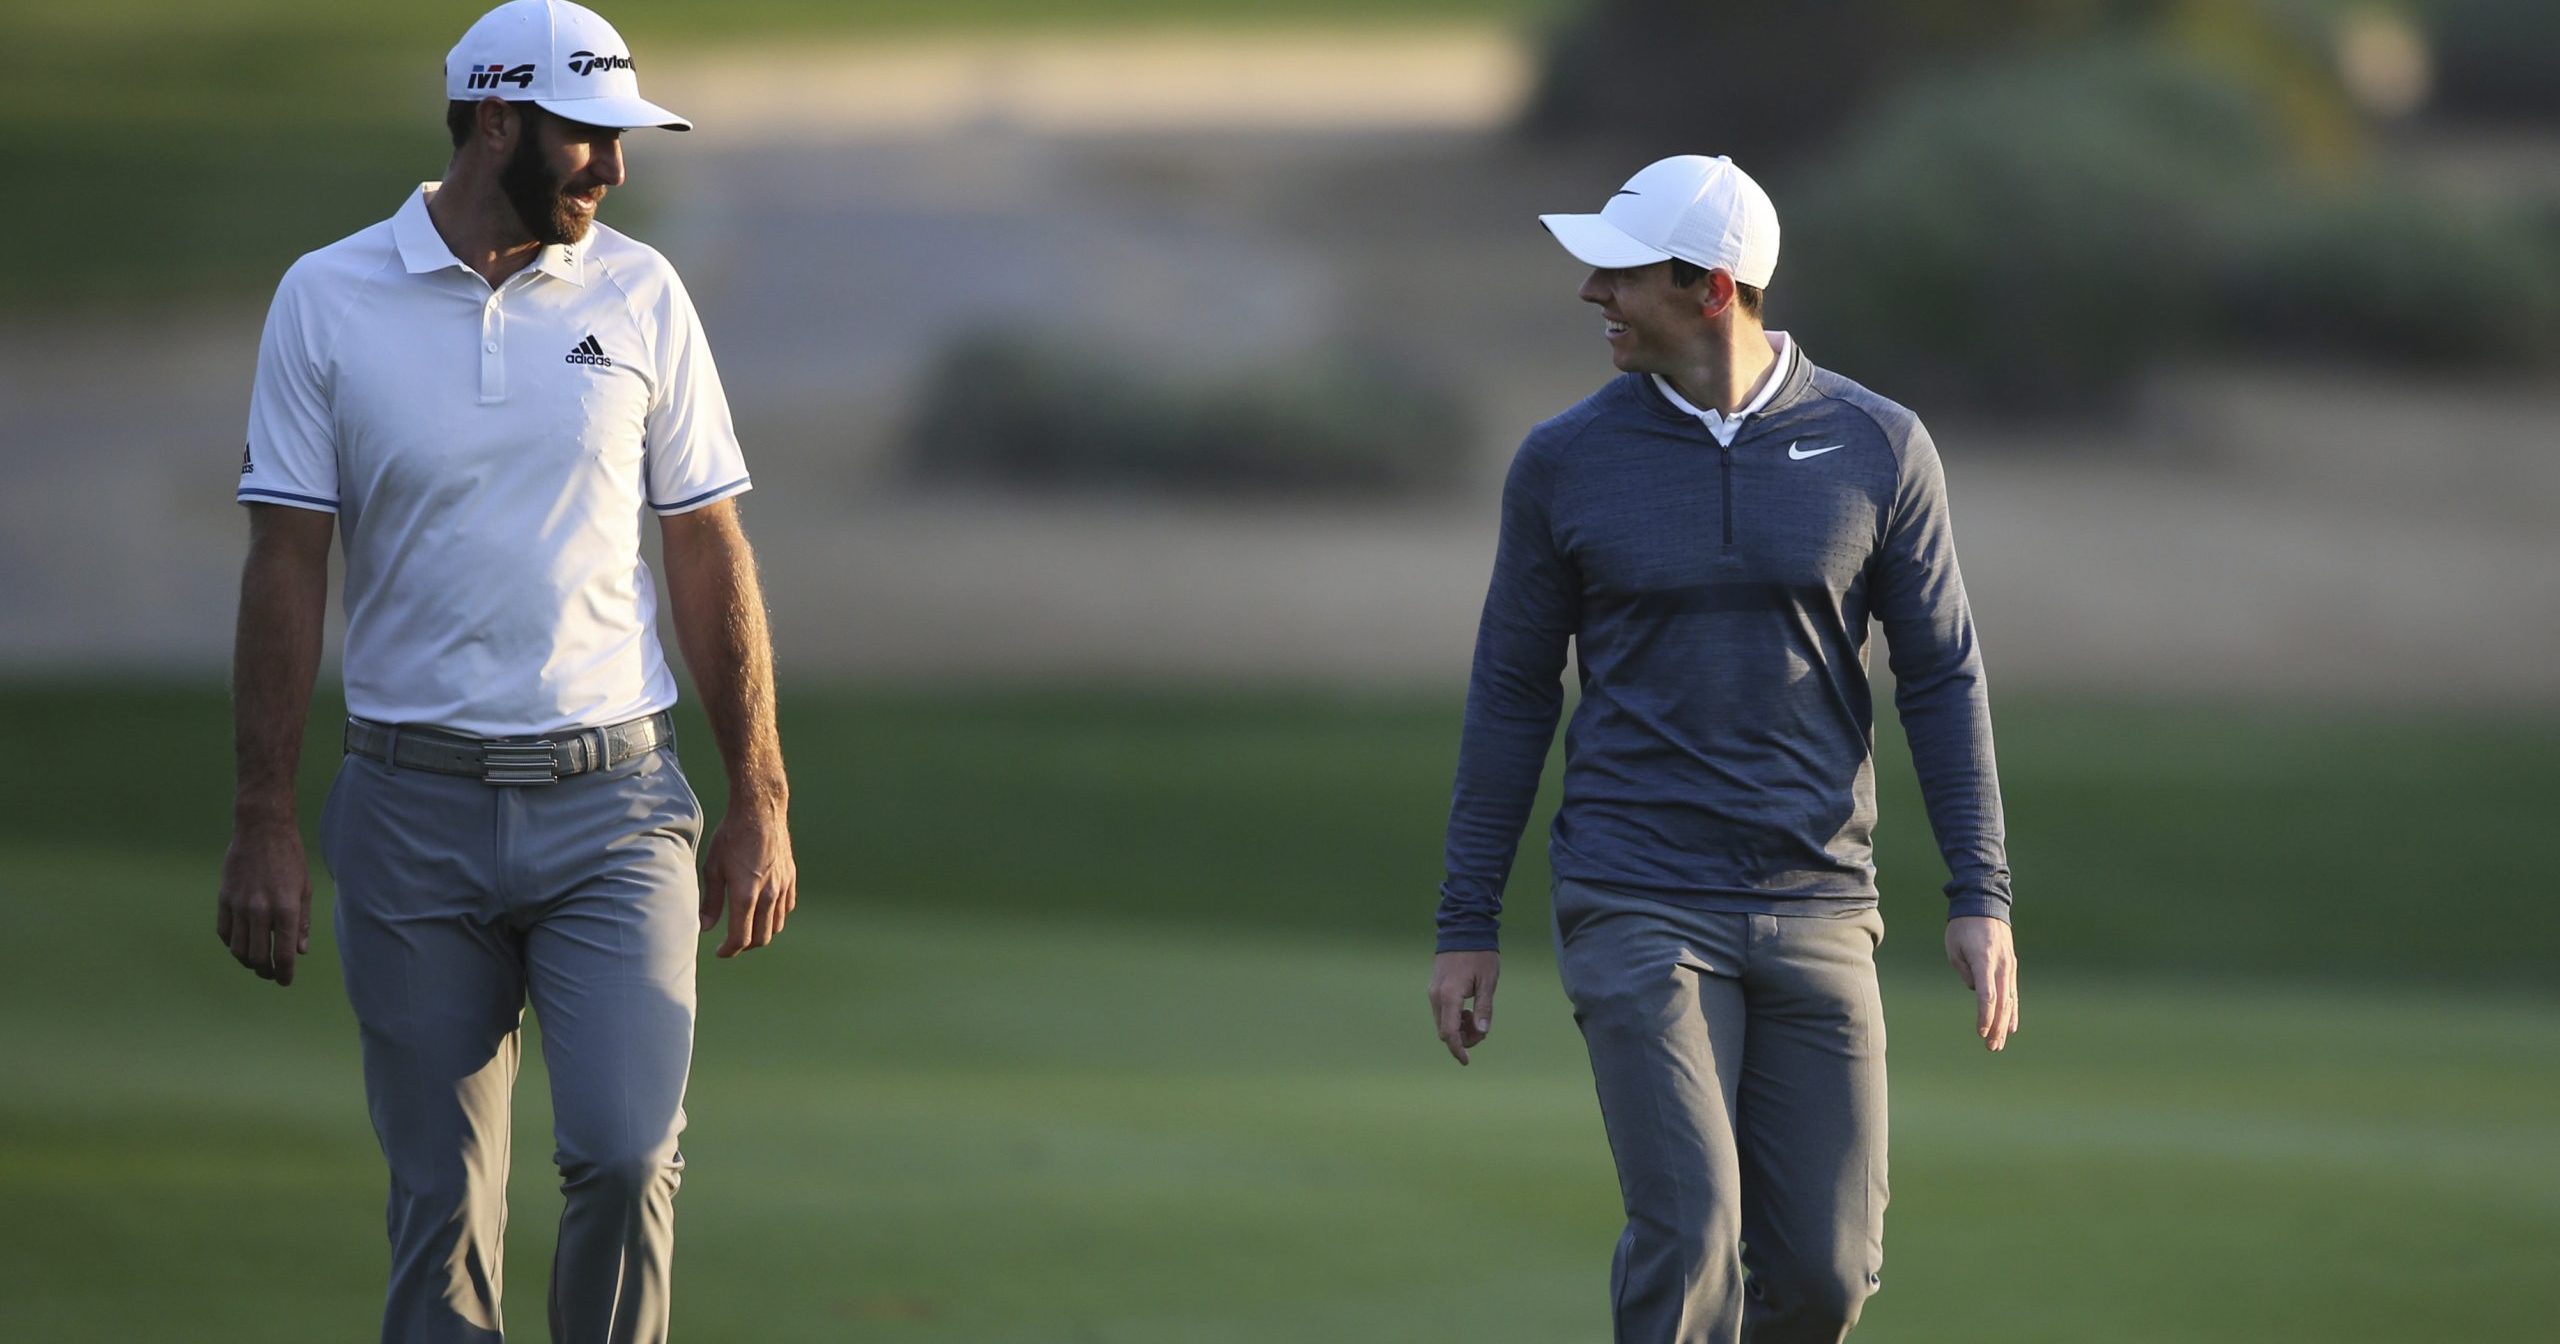 In this Jan. 18, 2018, file photo, Dustin Johnson of the United States, left, and Rory McIlroy of Northern Ireland talk on the 10th fairway during the first round of the Abu Dhabi Championship golf tournament in Abu Dhabi, United Arab Emirates.